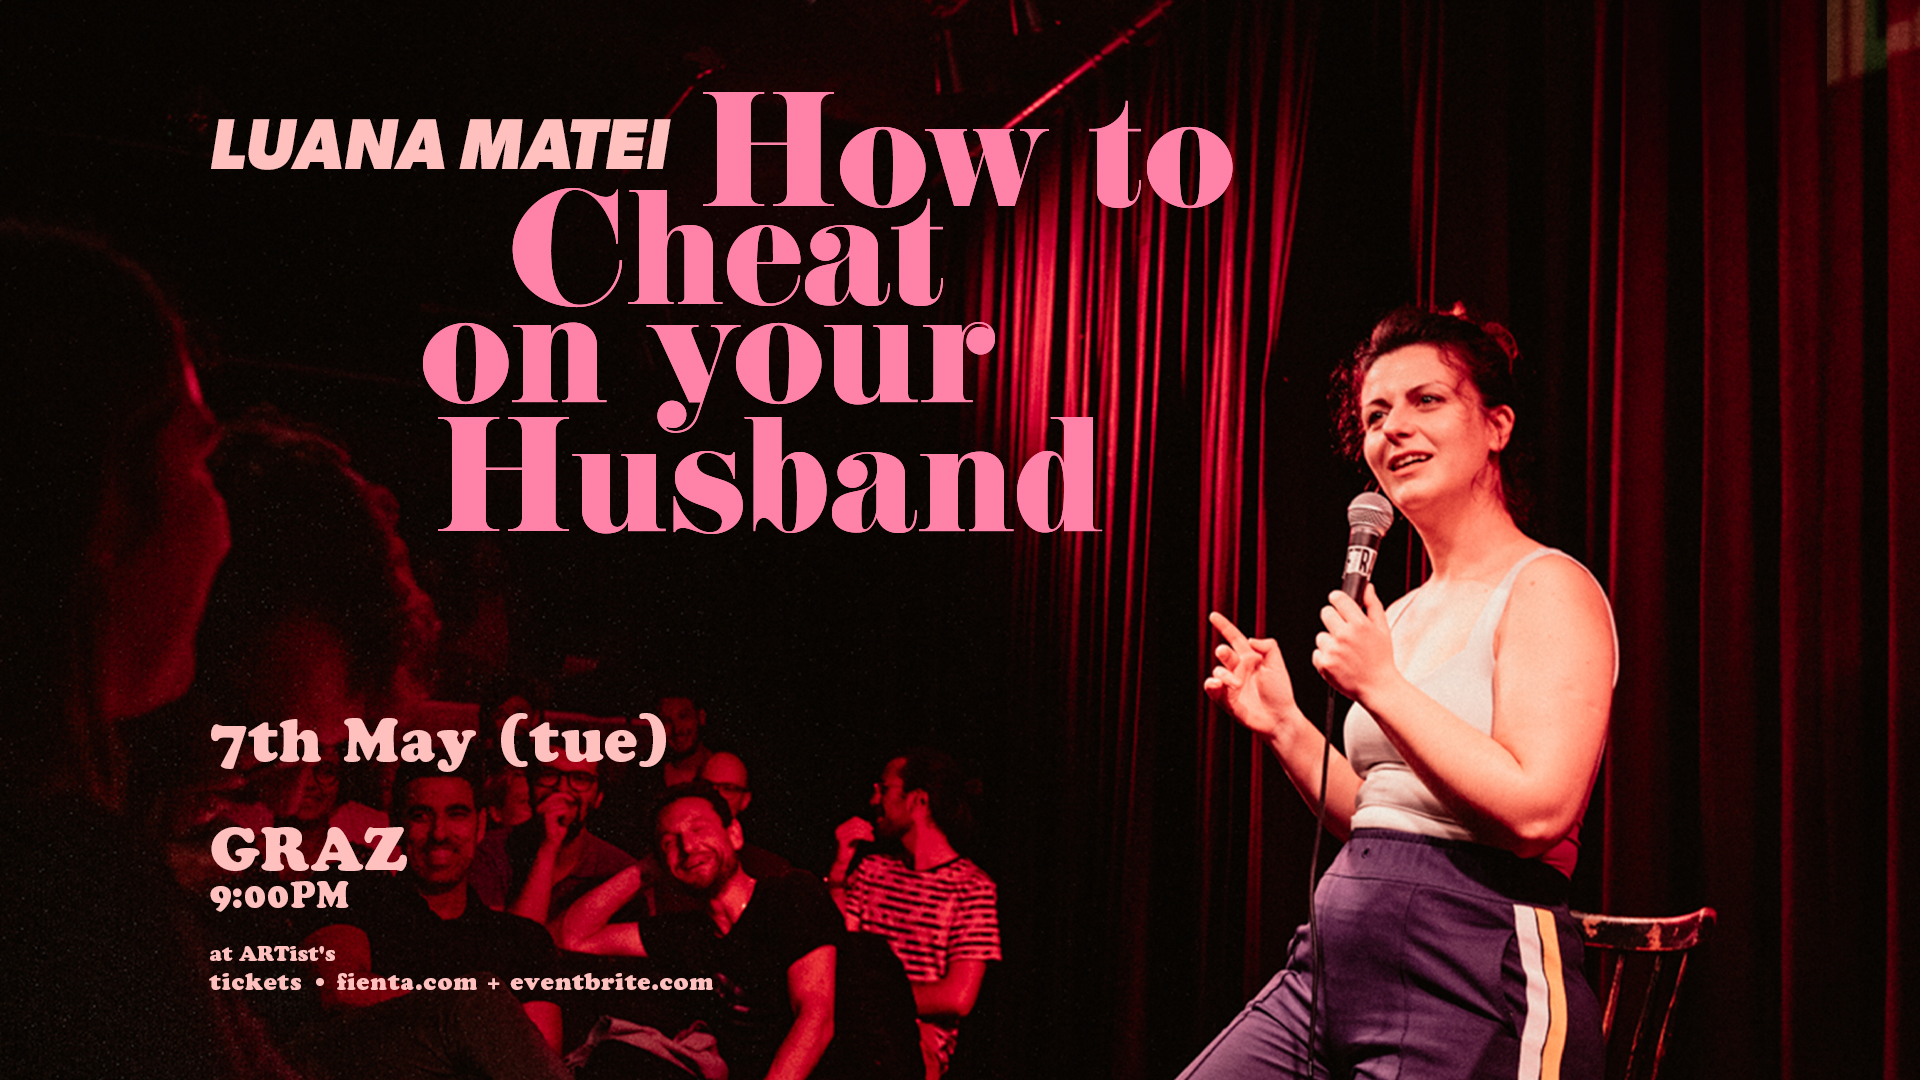 LUANA MATEI - How to Cheat on Your Husband